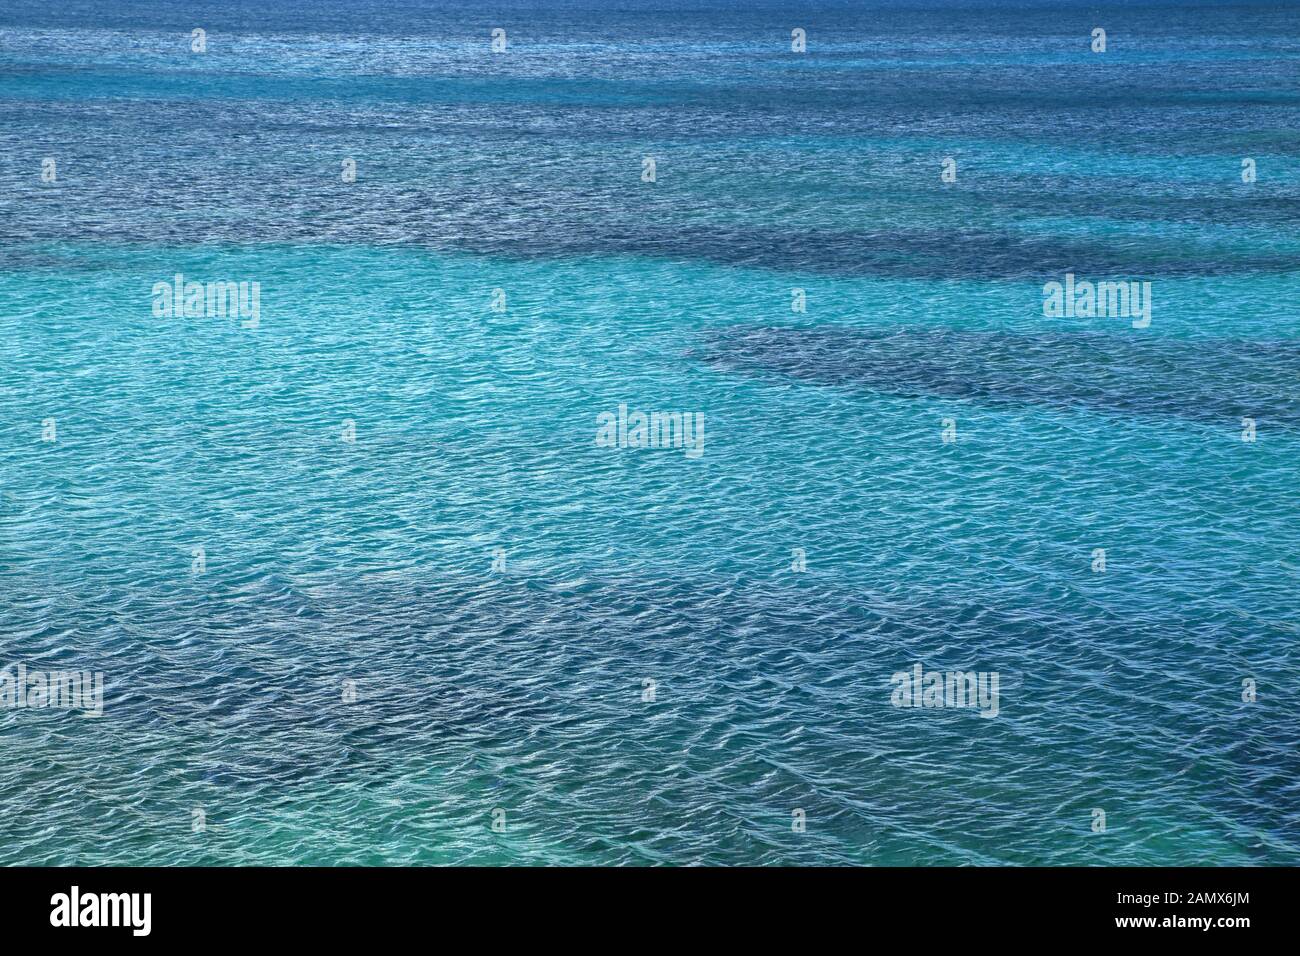 Sea water surface background wave pattern. Ocean water surface texture. Stock Photo